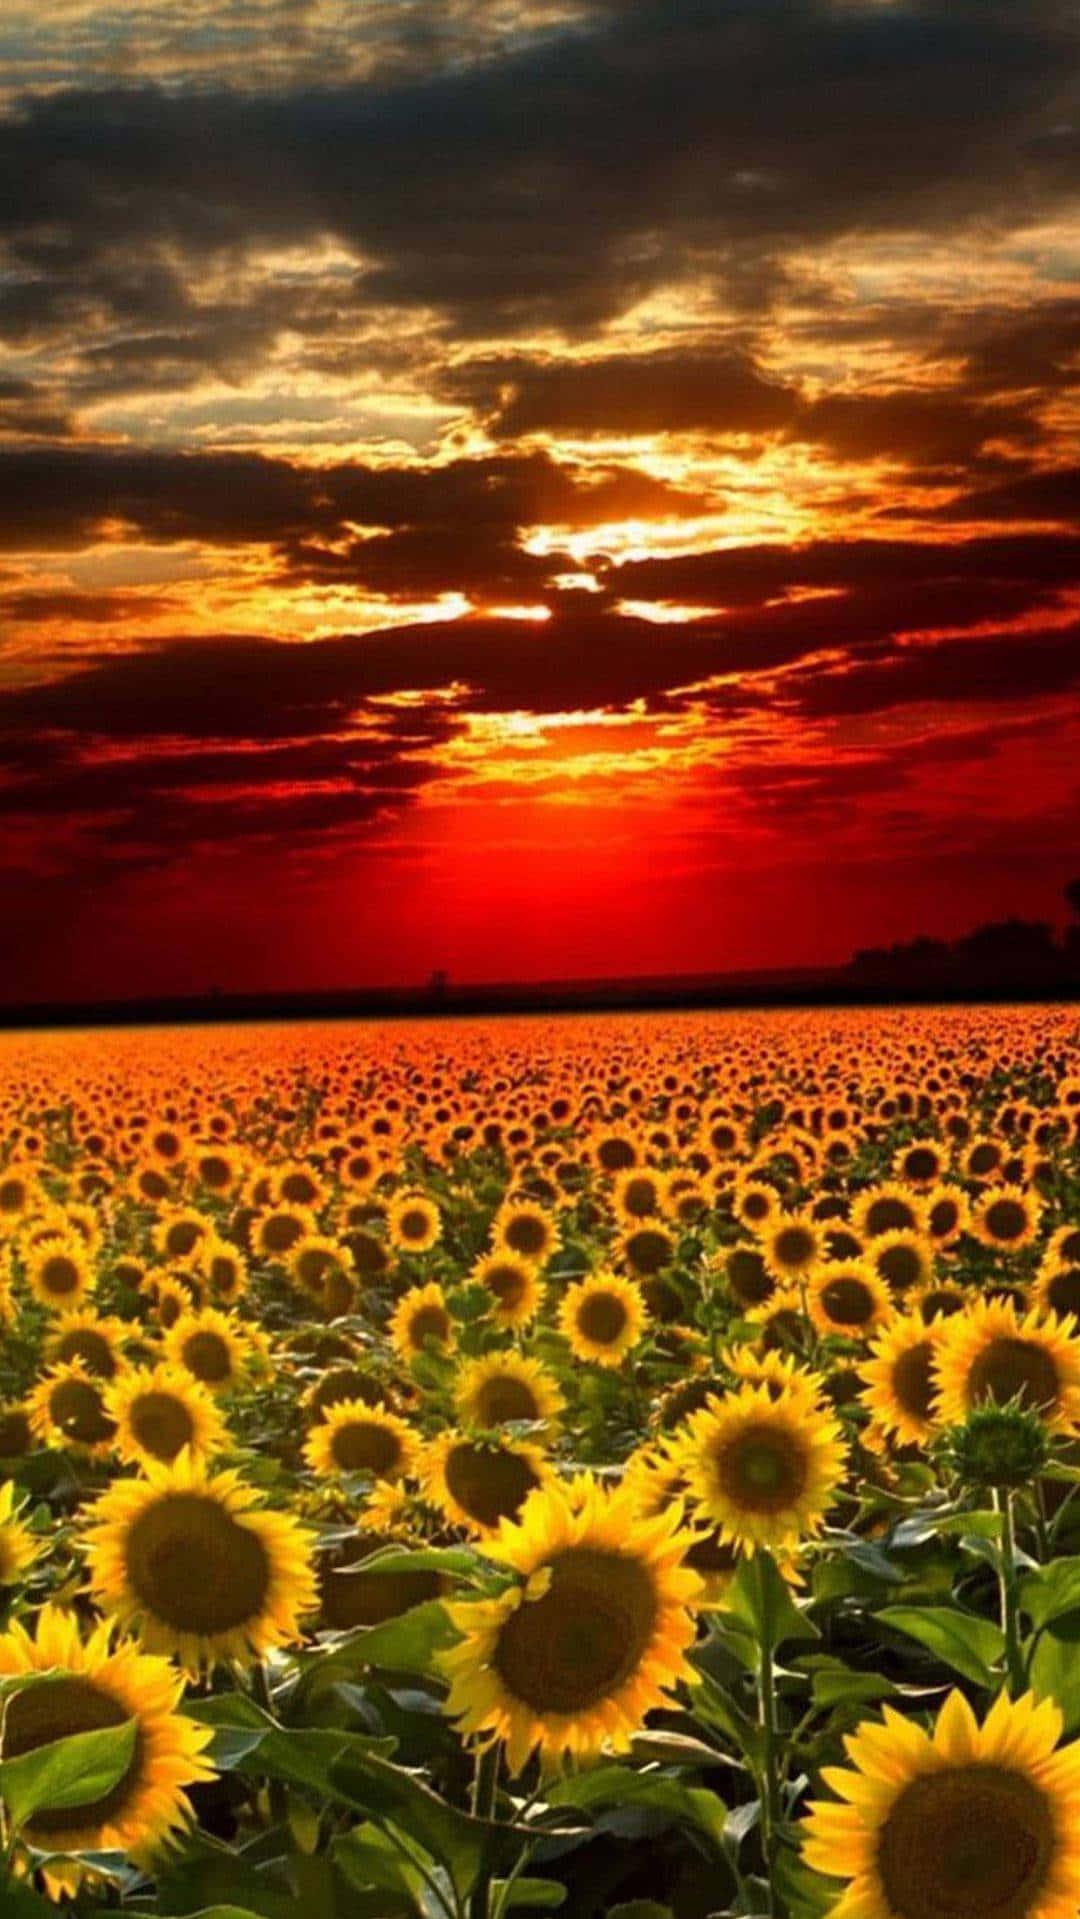 Enjoy The Beauty Of Sunflowers With This Aesthetic